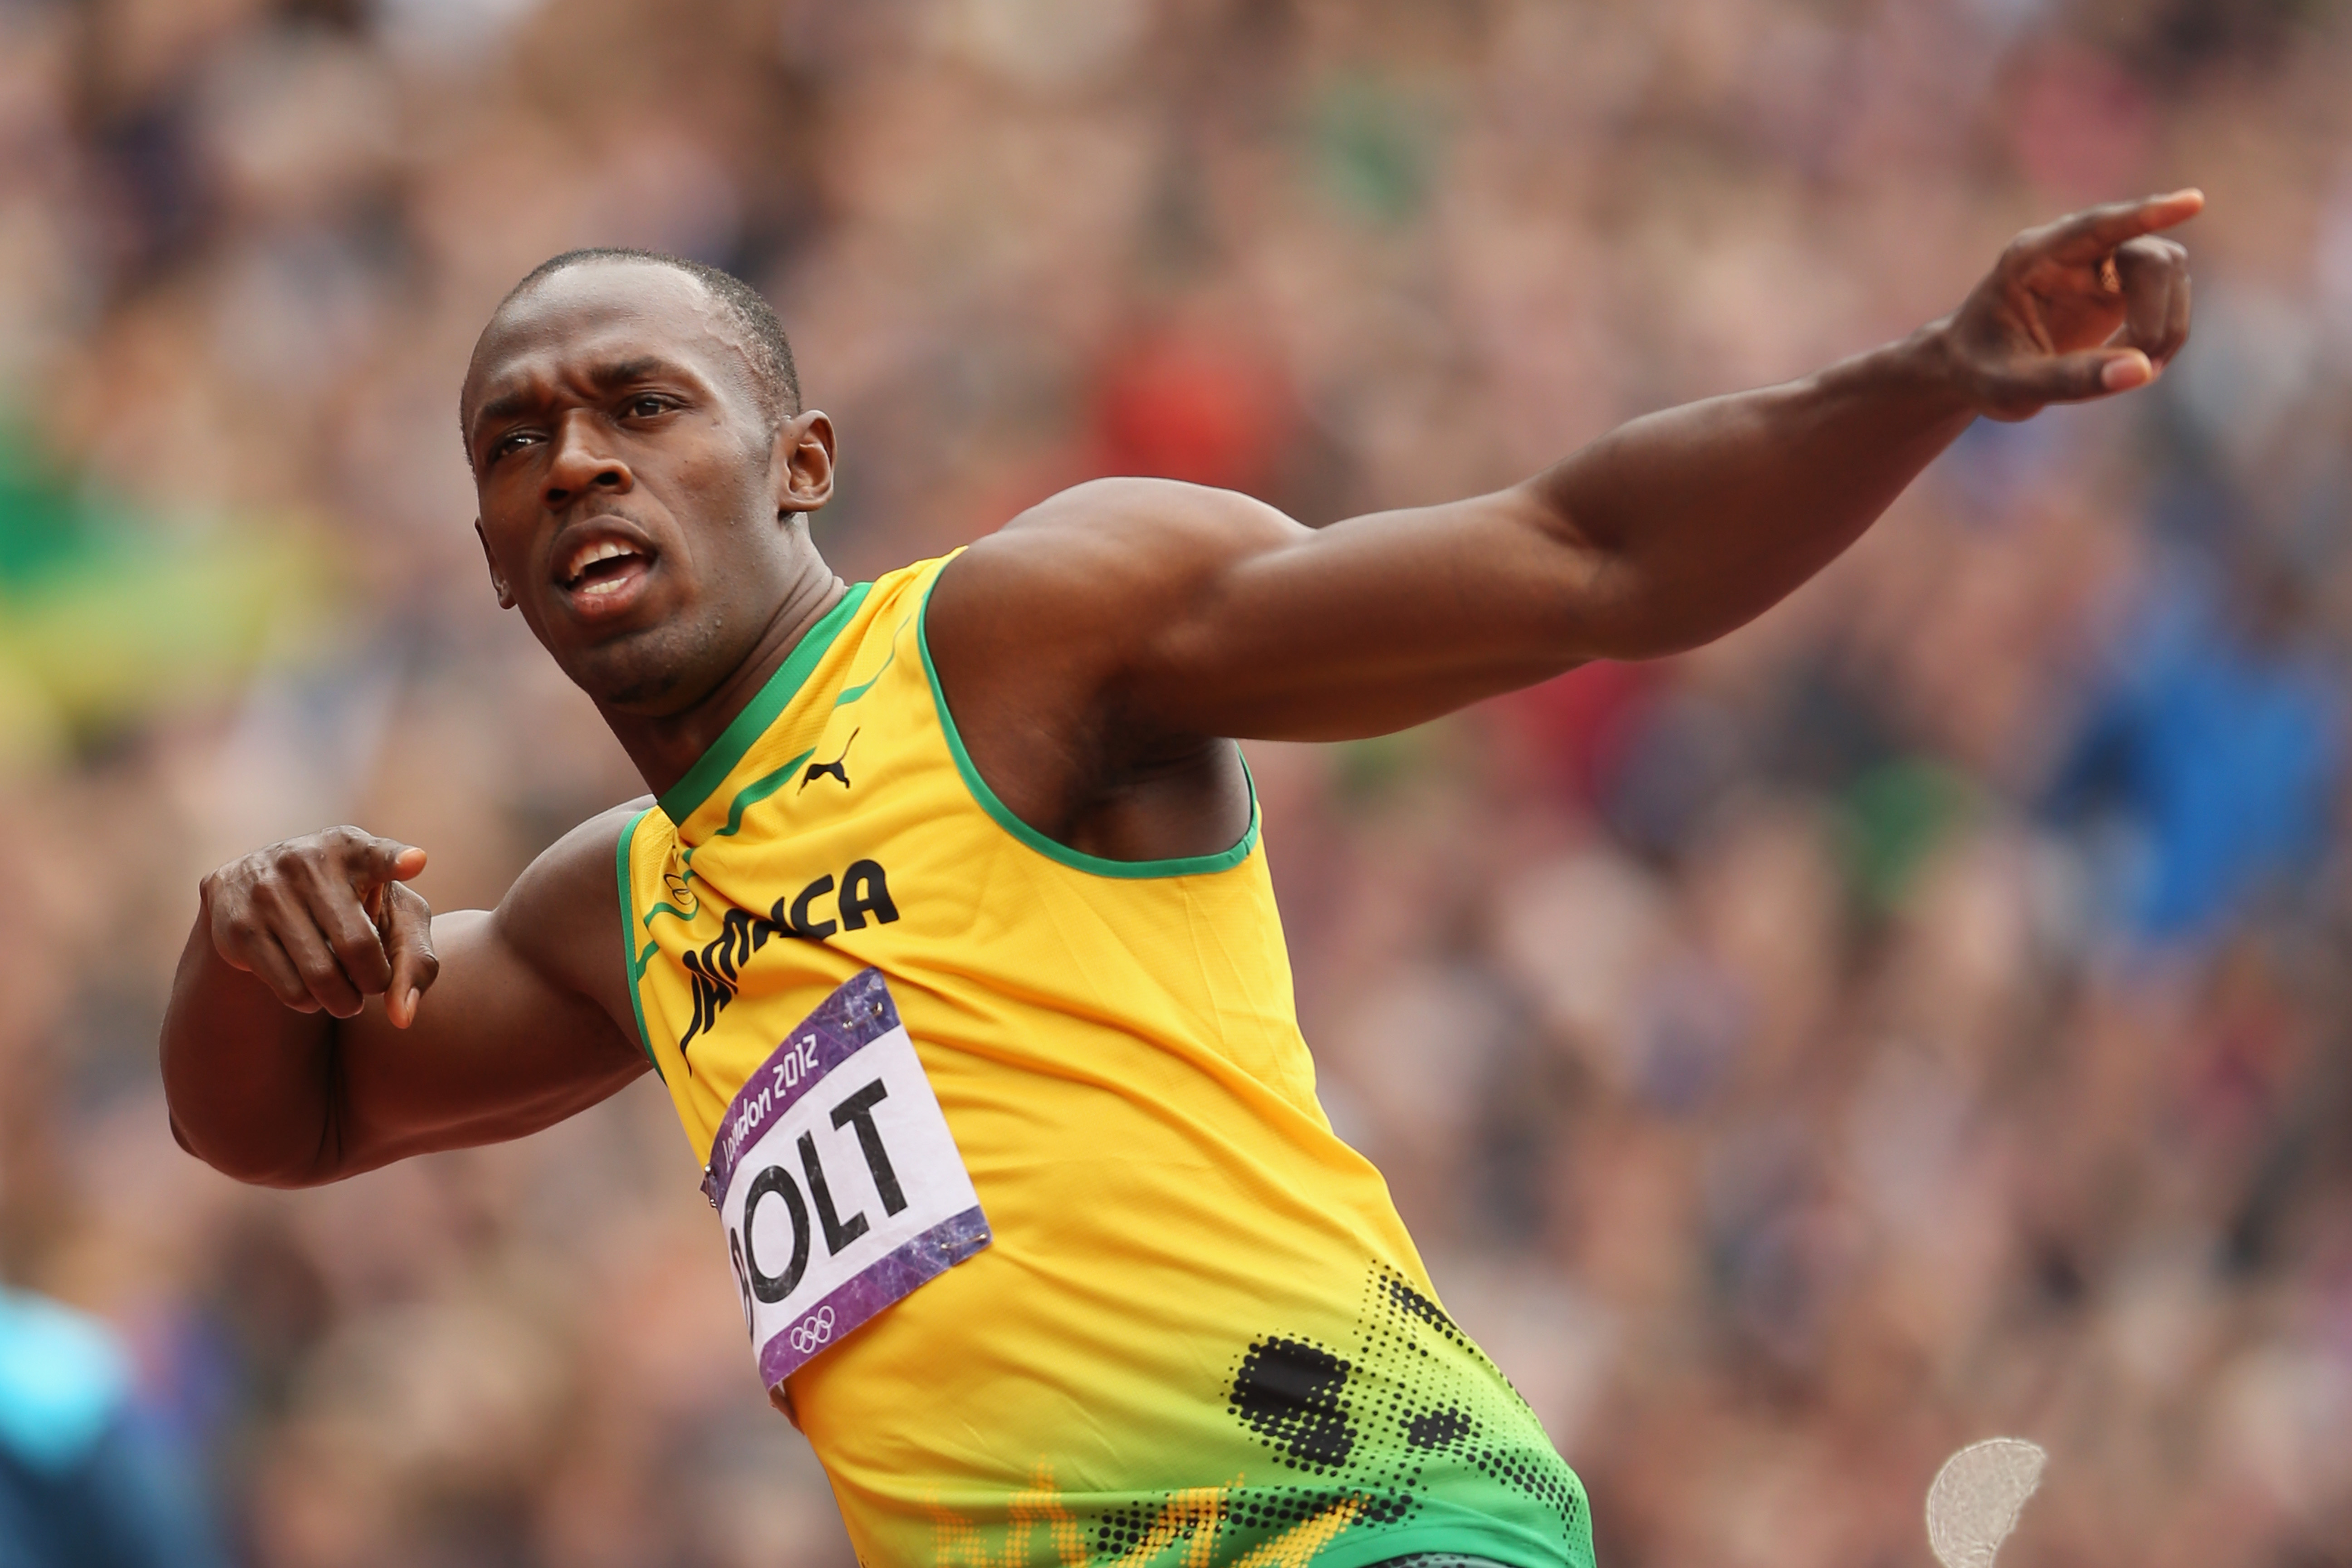 Usain Bolt speaks about his 'height disadvantage', the untied shoelace, and Manchester United